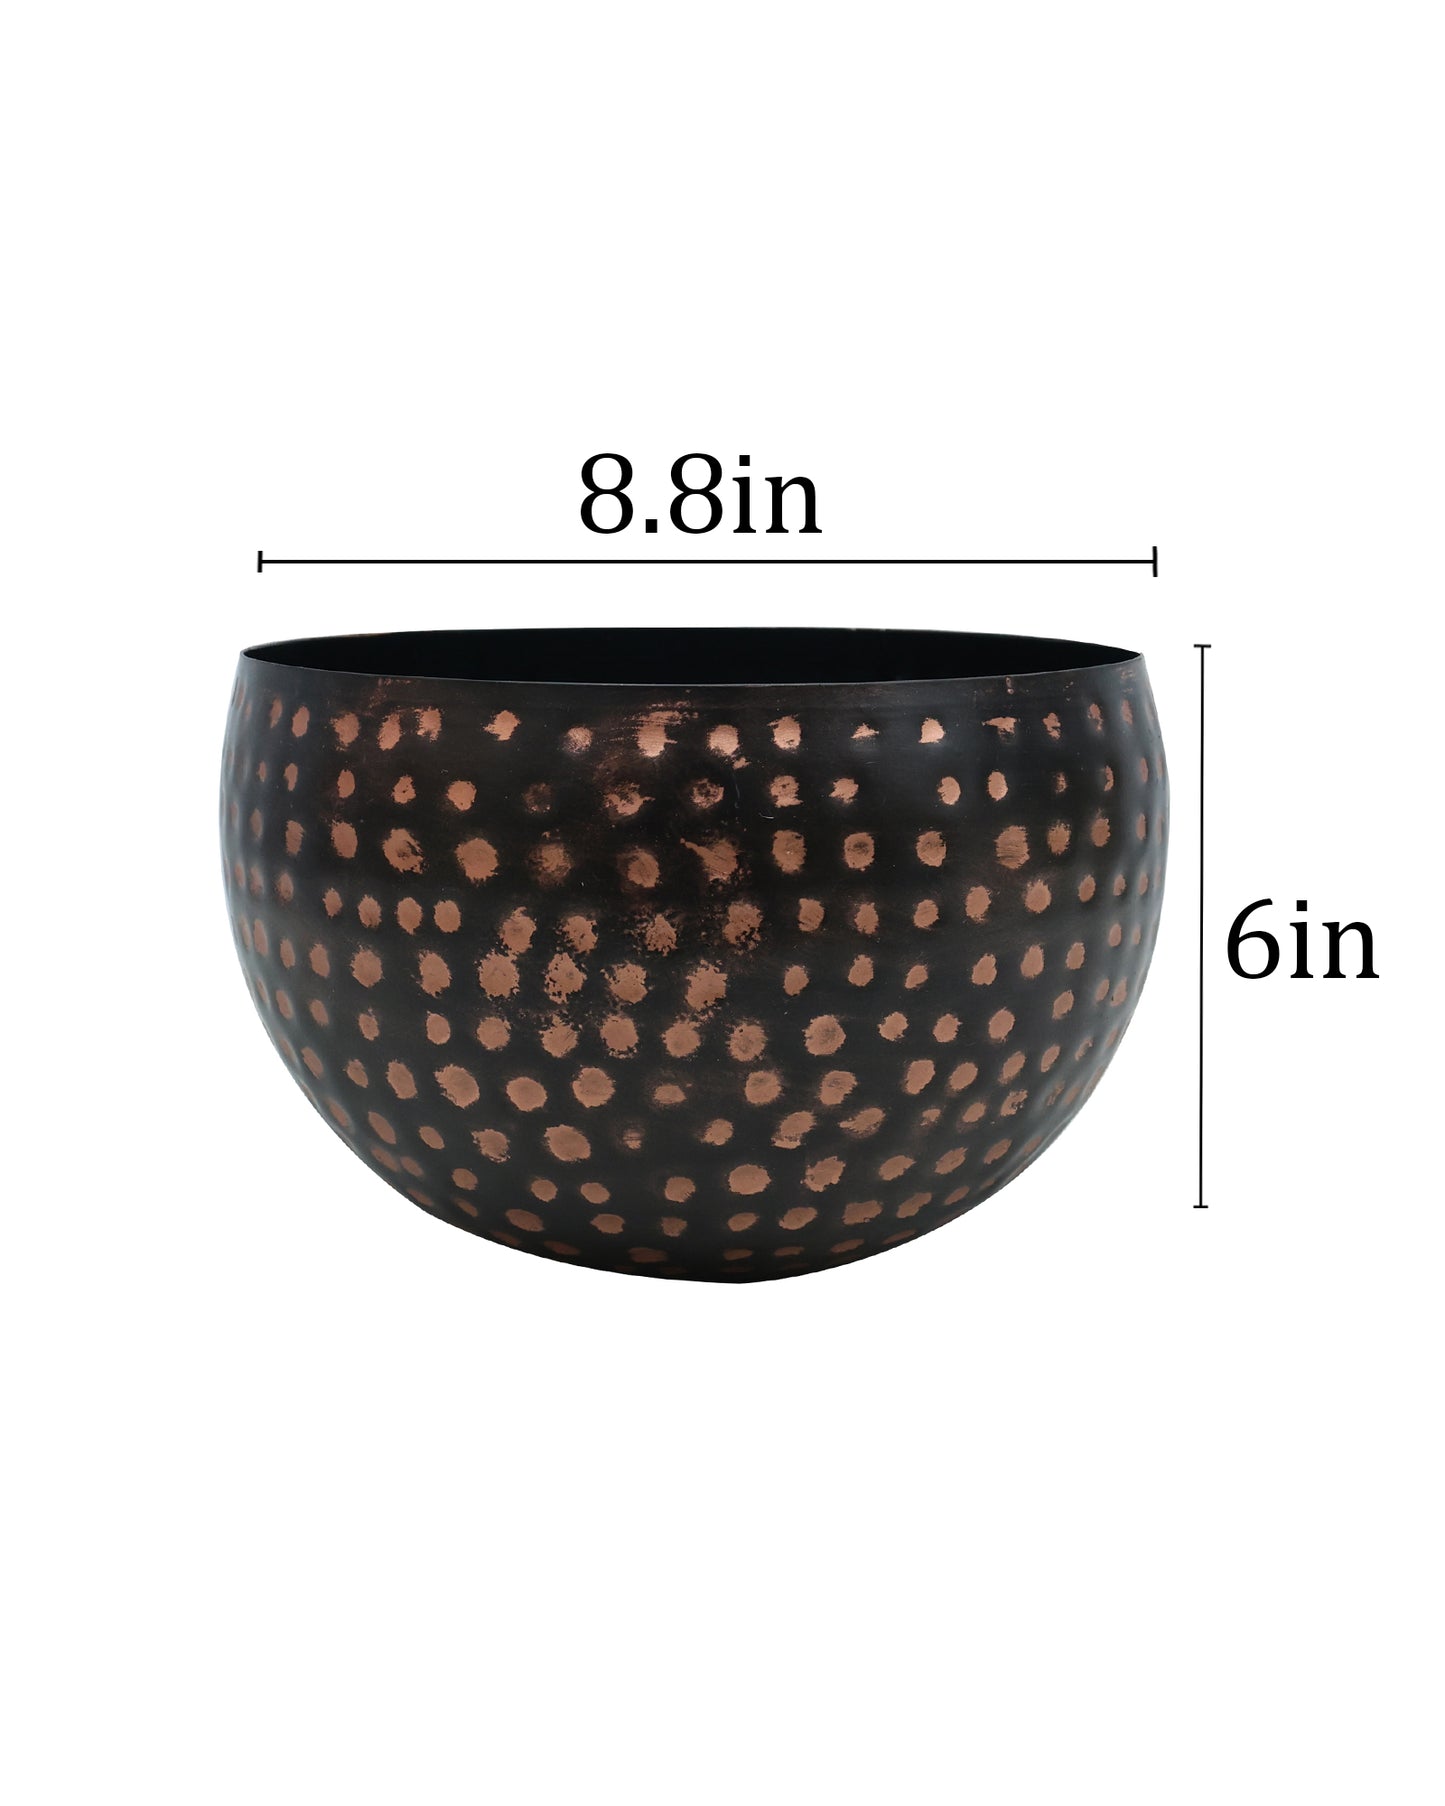 Metal Plant Pot with Hammered Design, Decorative Small Succulent Planter, Bowl